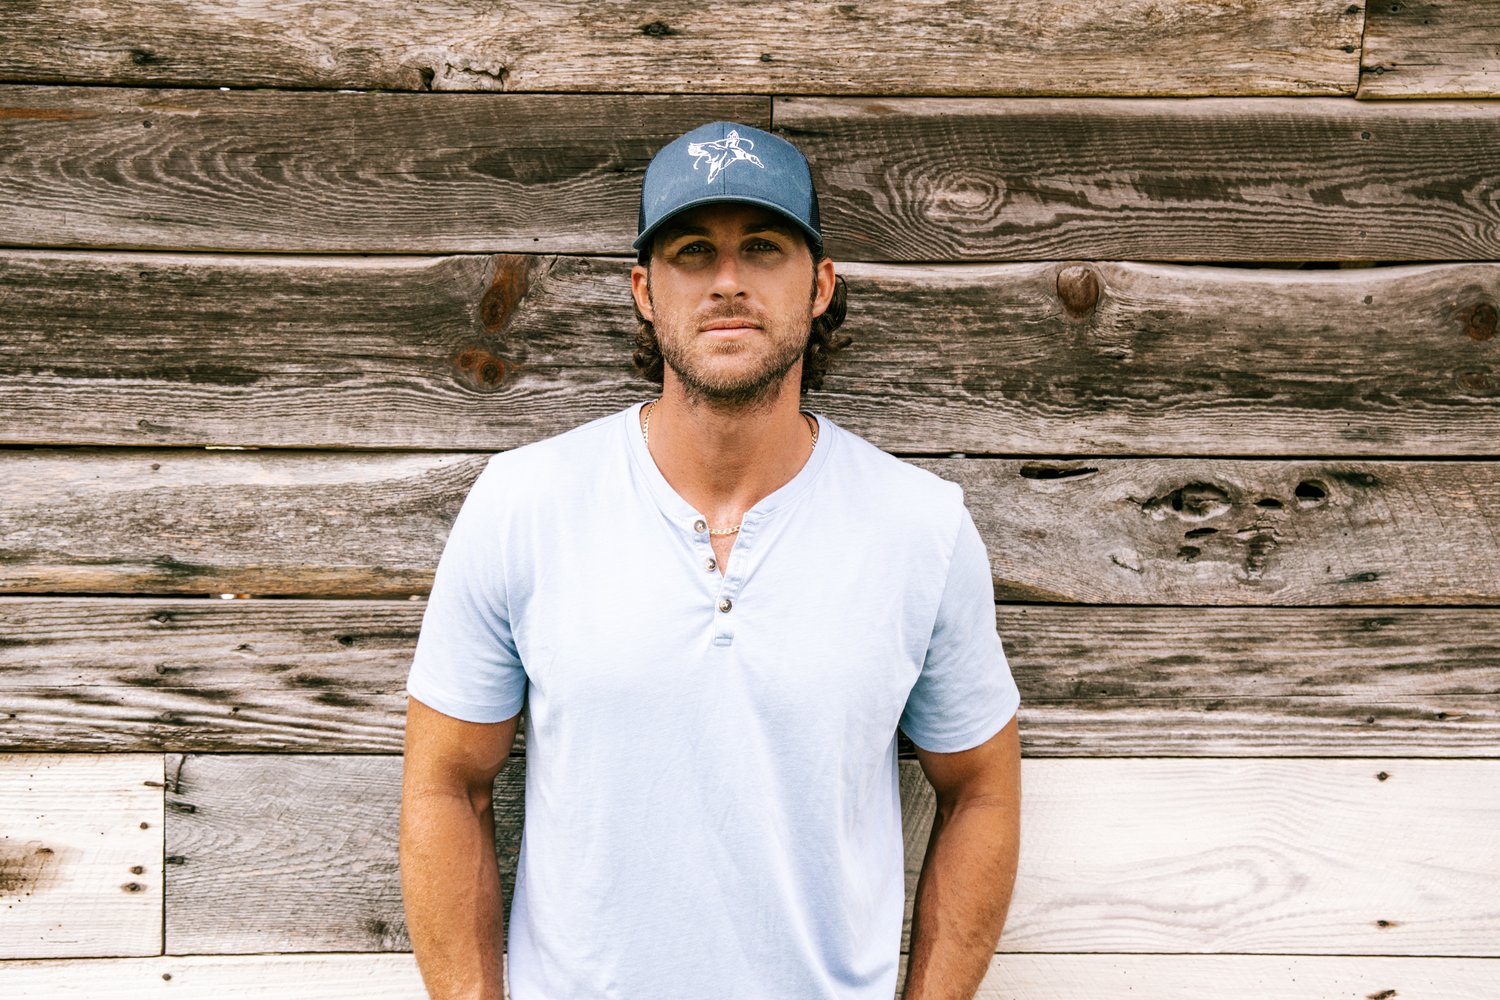 Country music star Riley Green will headline THE PLAYERS Championship Military Appreciation Day concert this year.